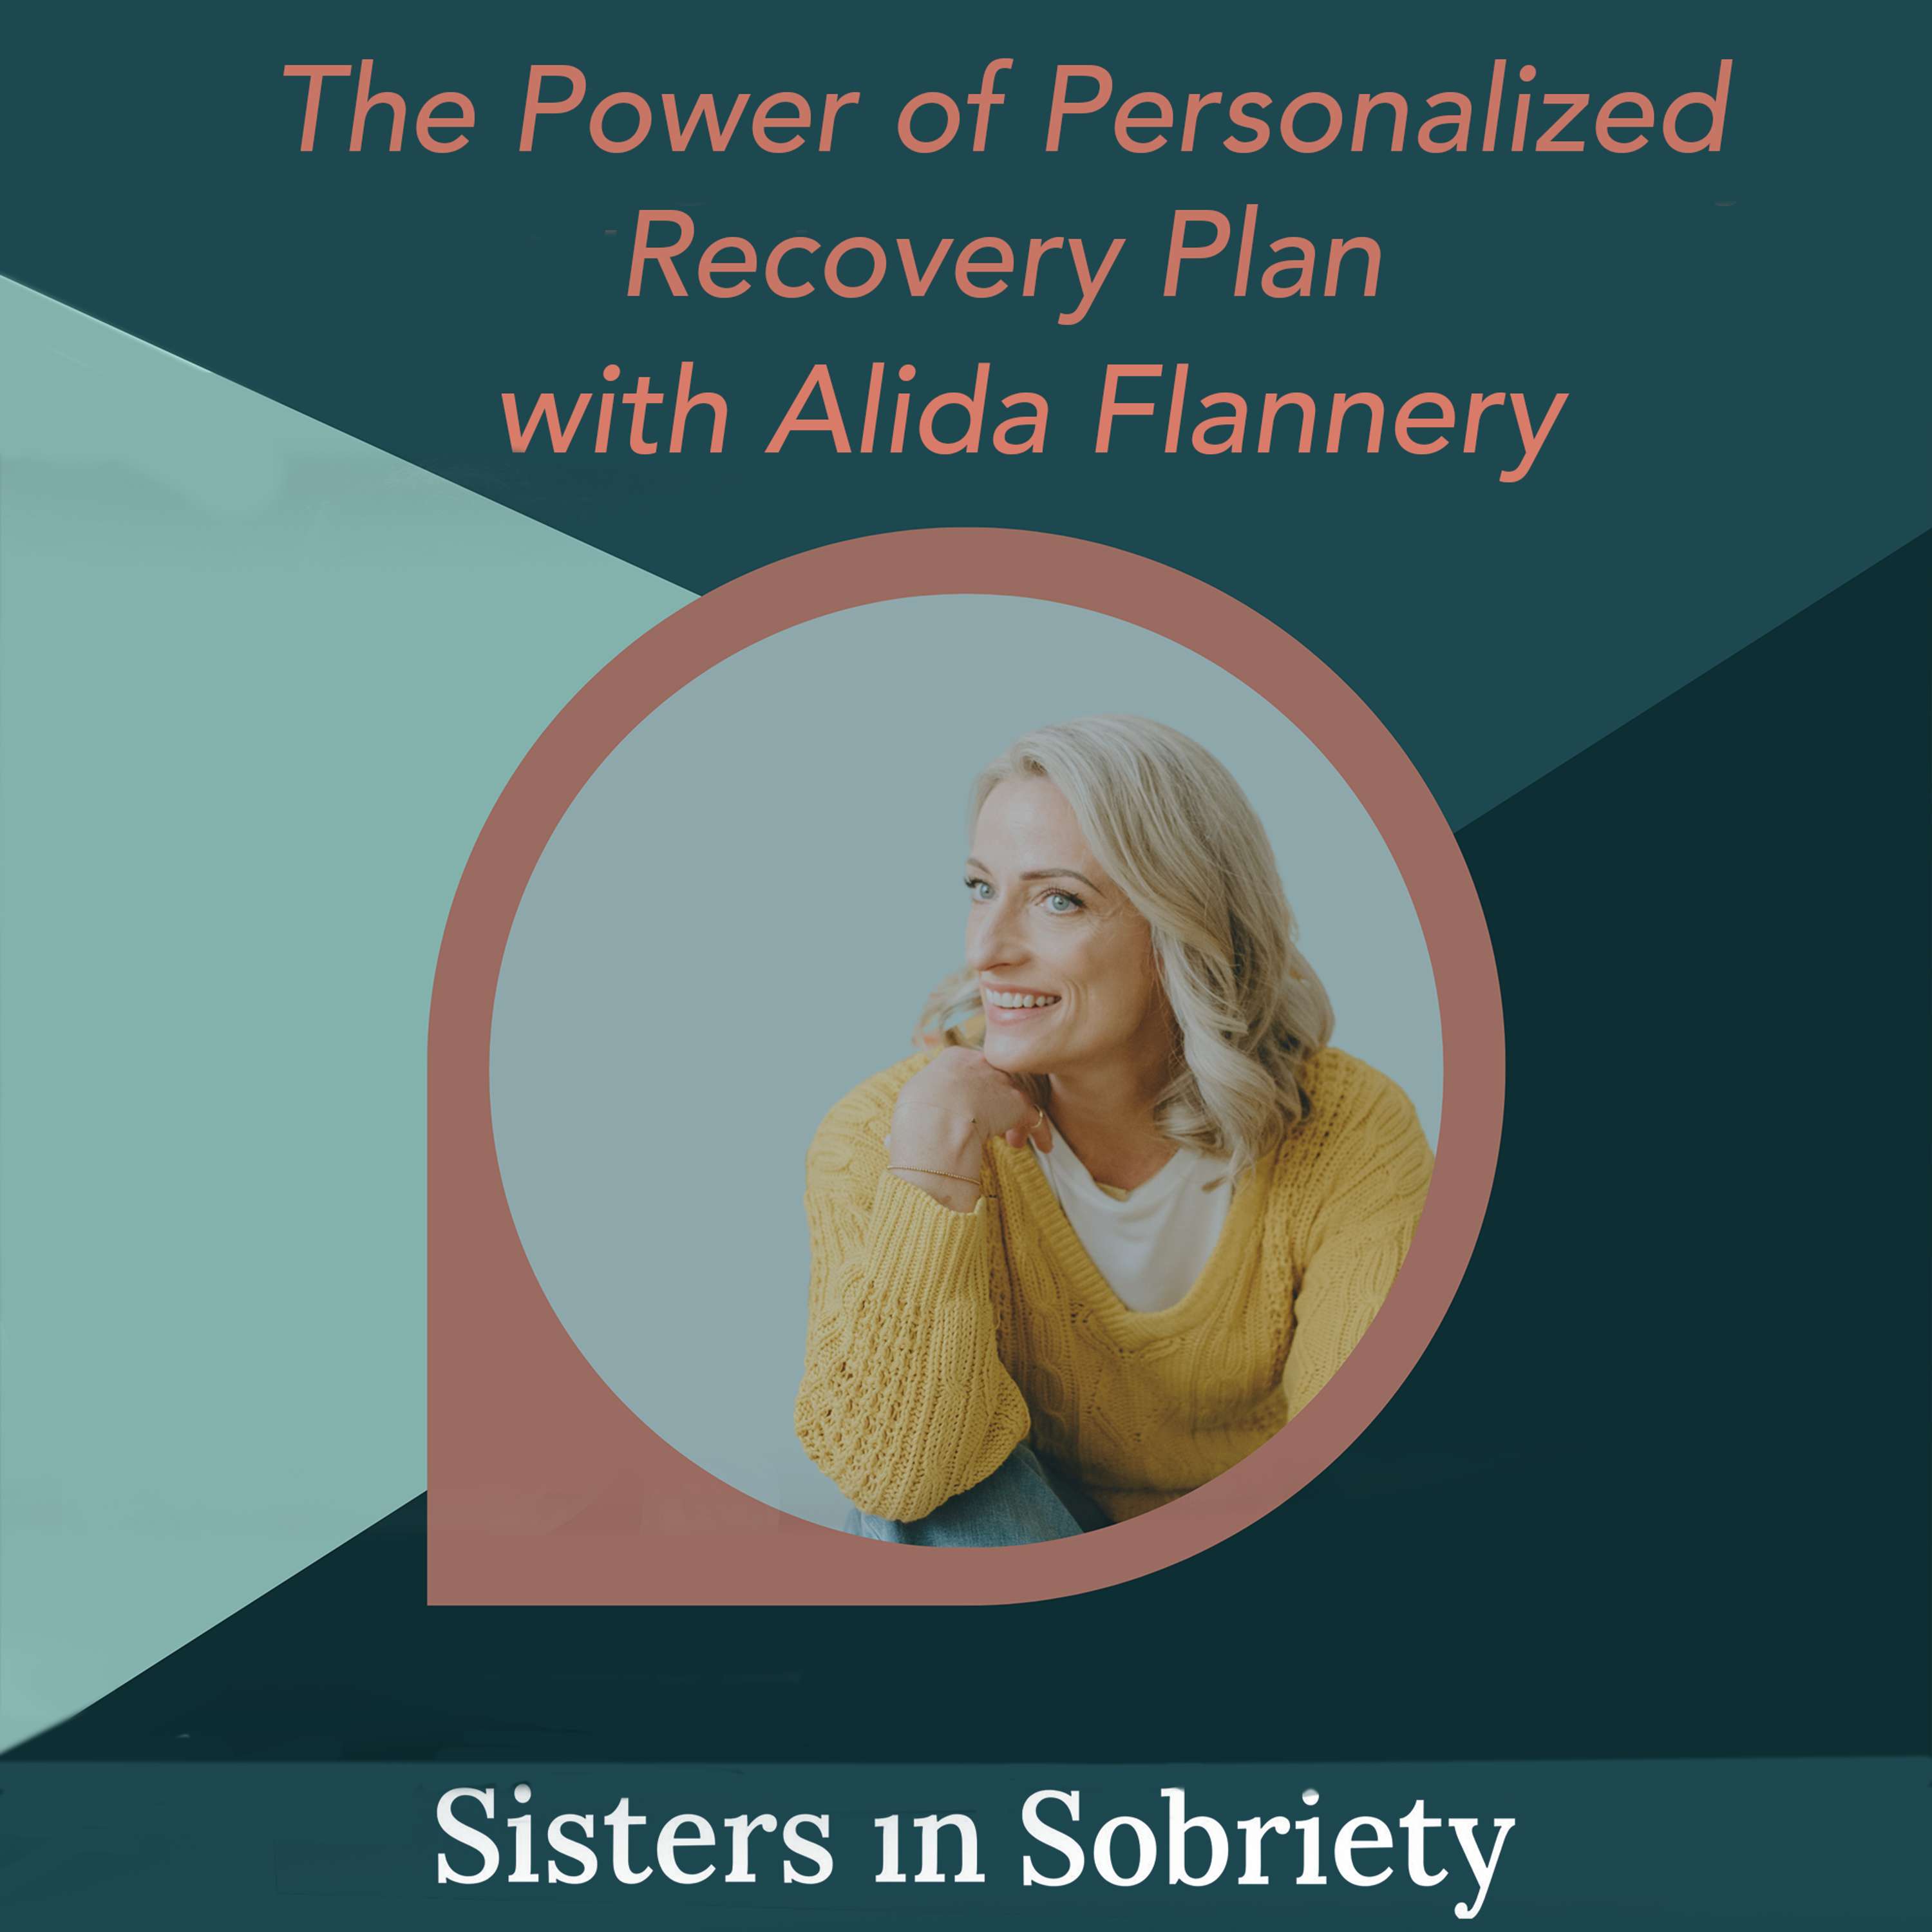 The Power of Personalized Recovery Plans With Alida Flannery